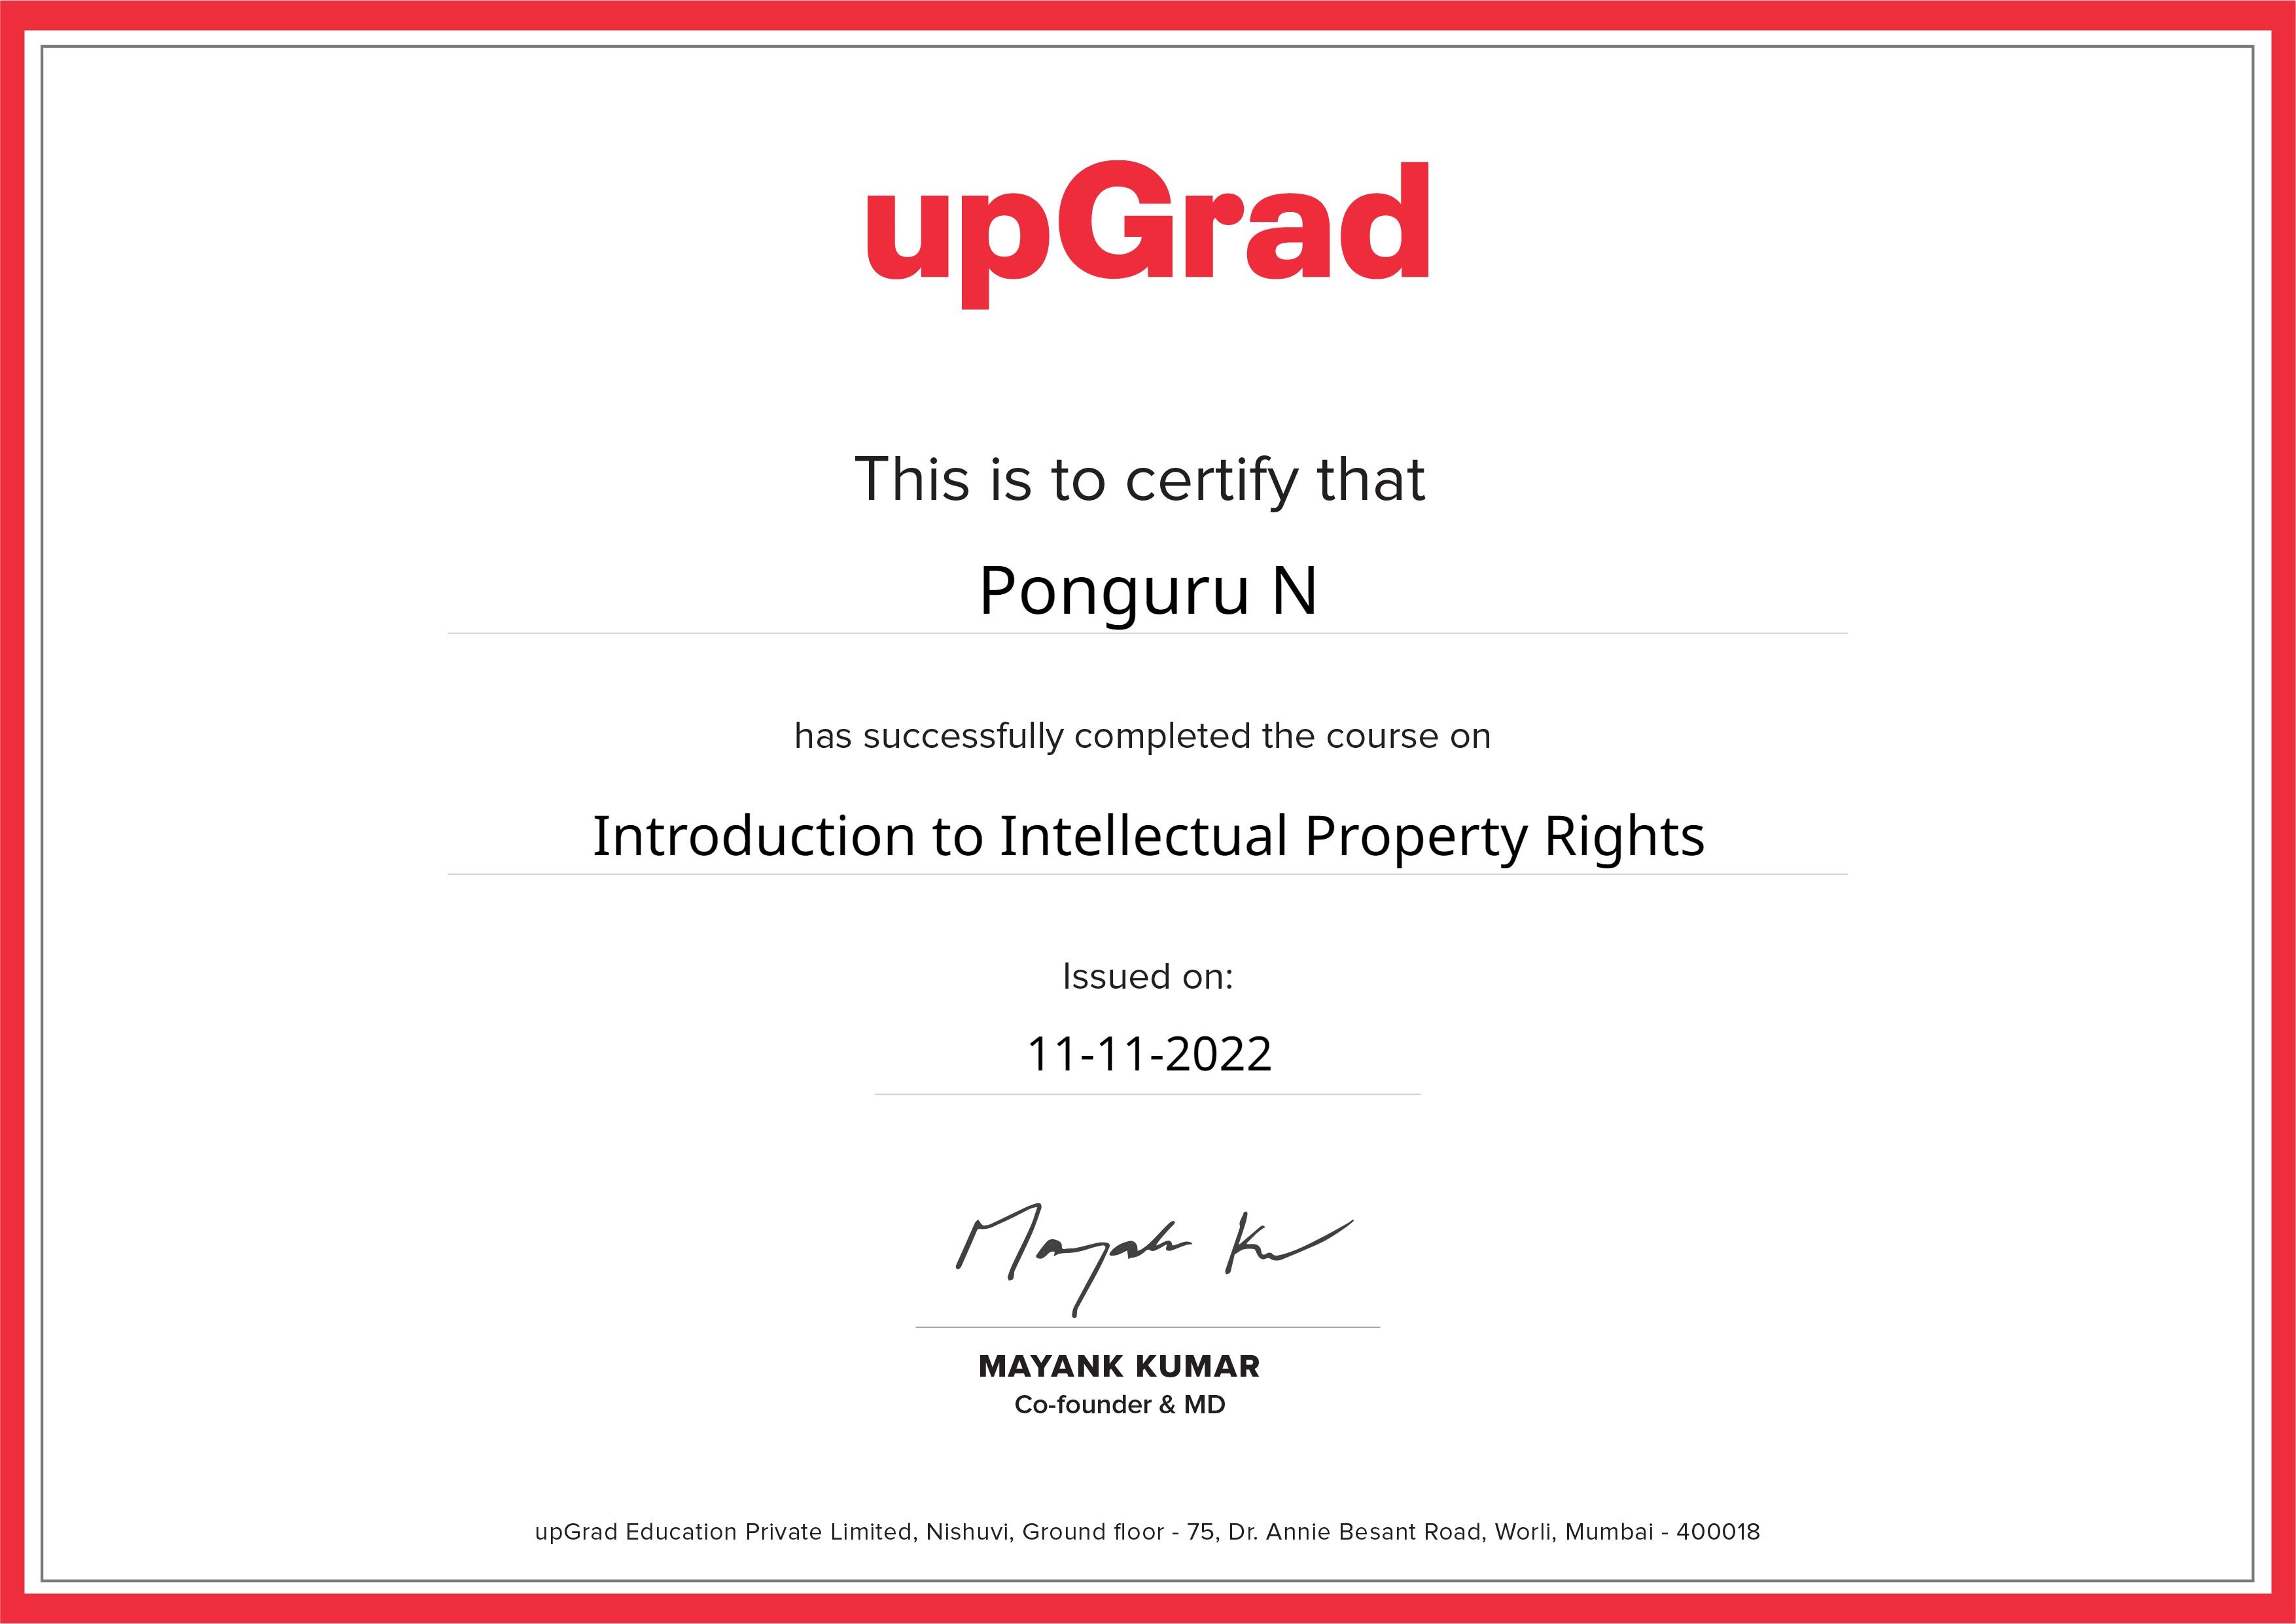 Introduction to Intellectual Property Rights